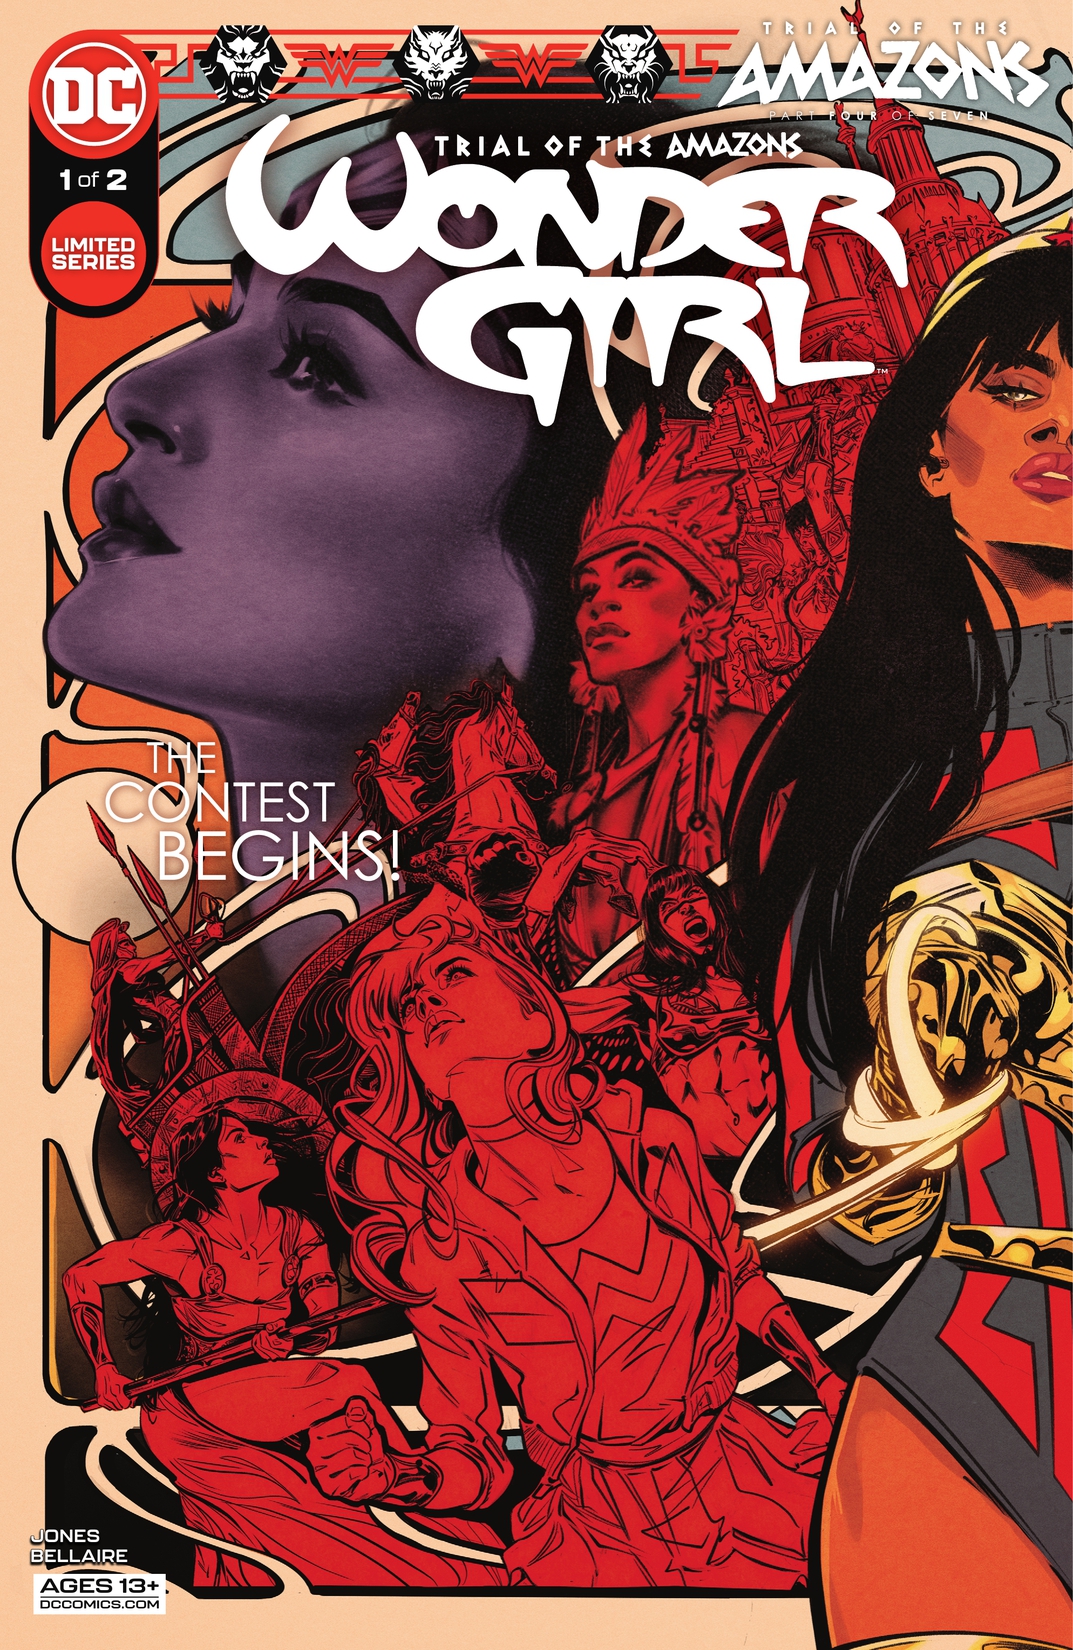 Trial of the Amazons: Wonder Girl #1 preview images